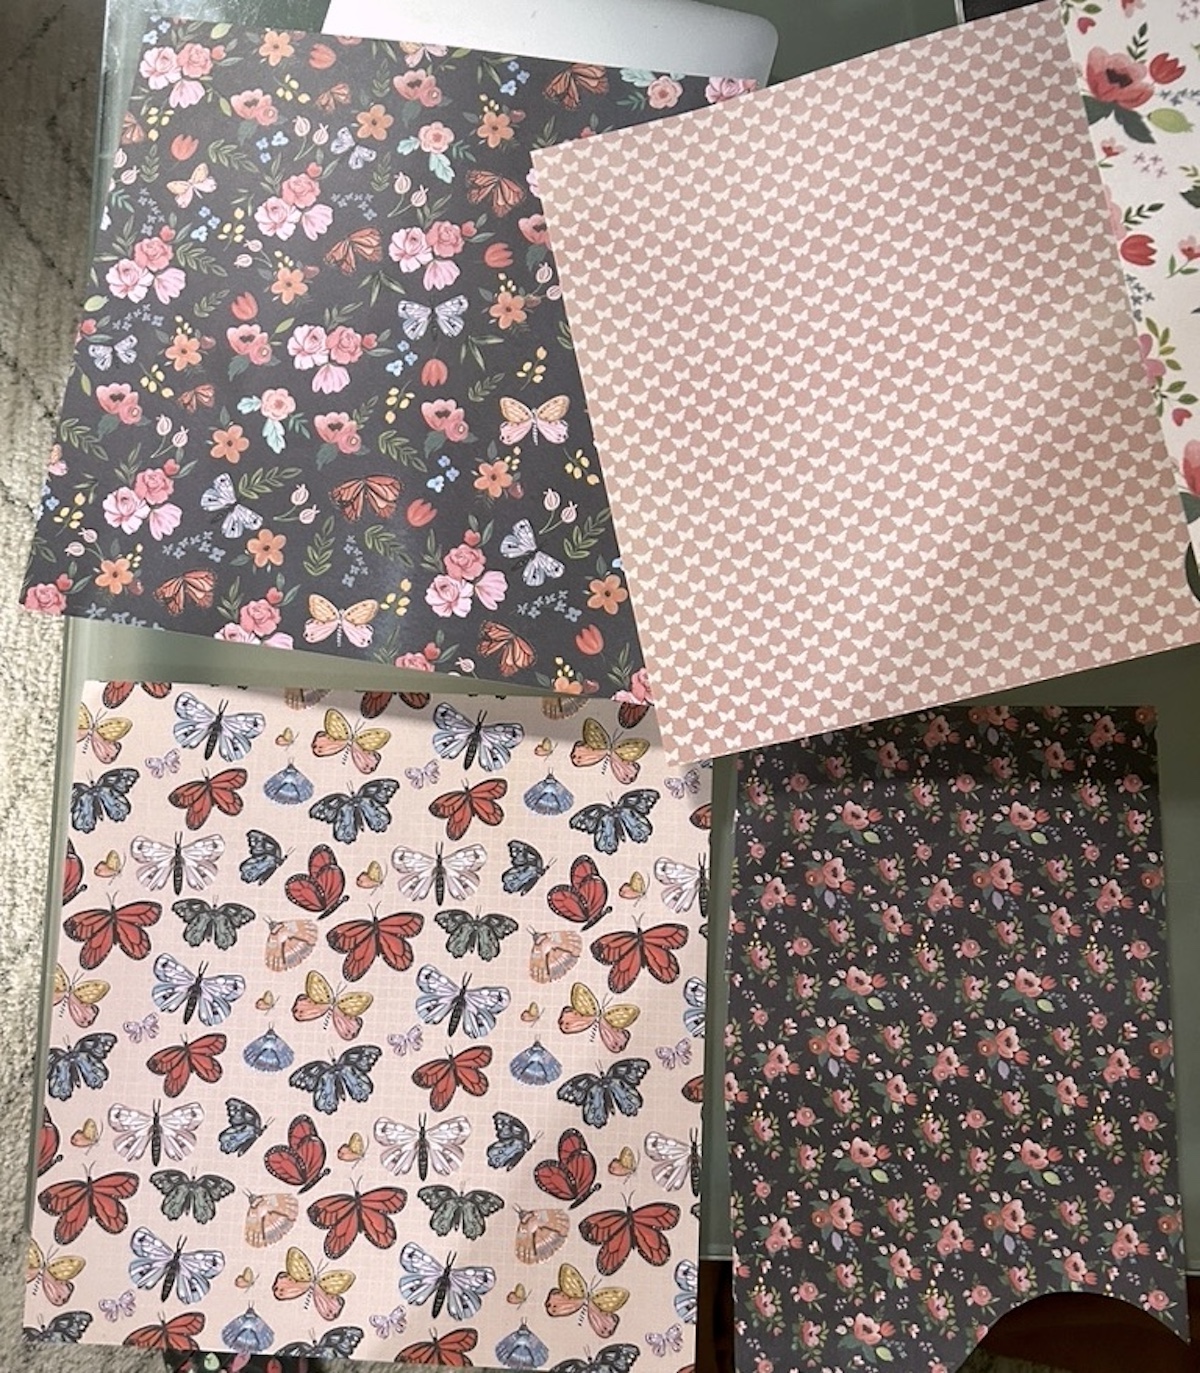 Four sheets of scrapbook paper laid out on a table